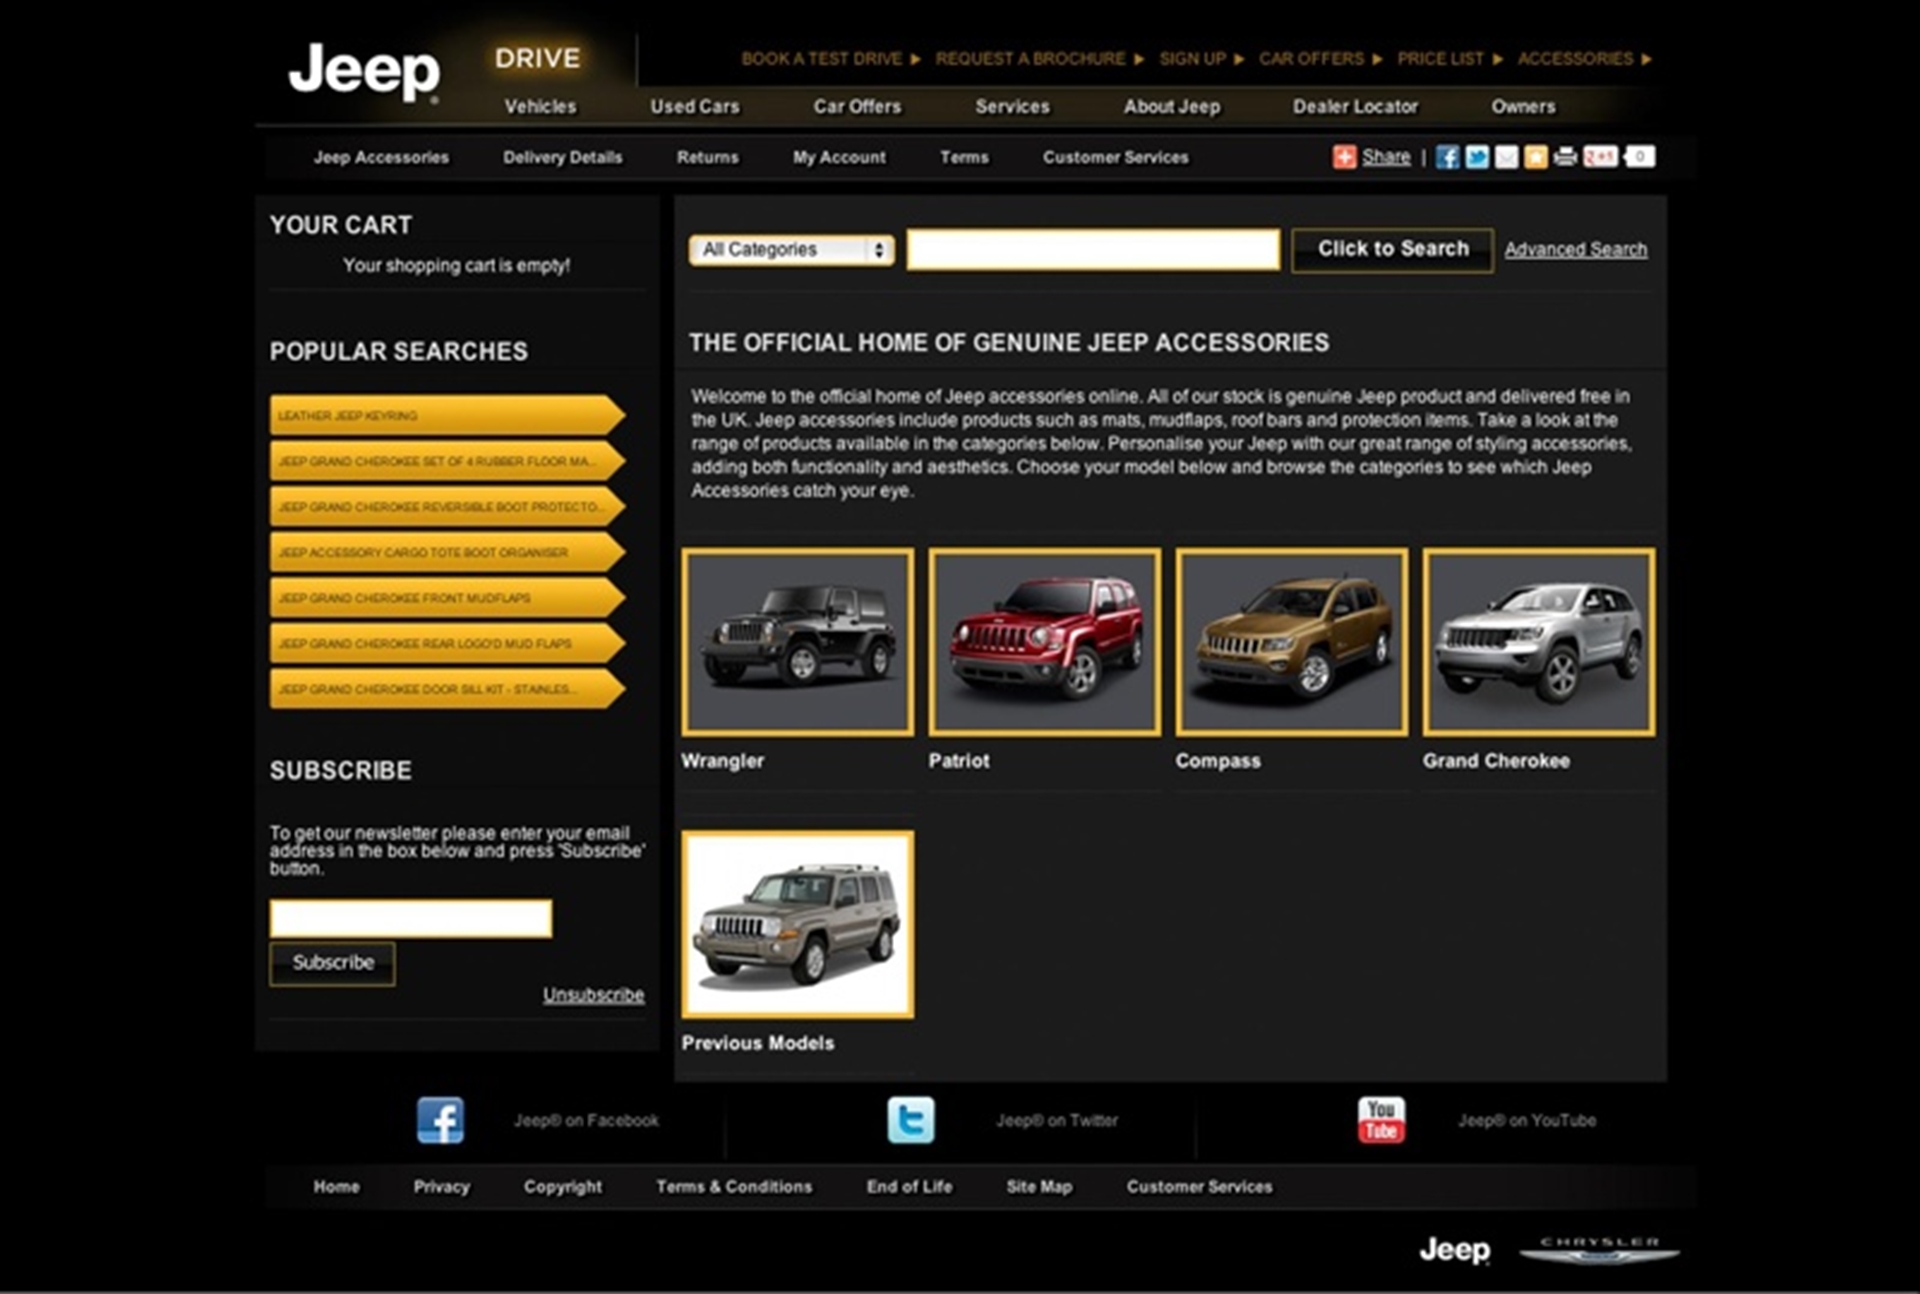 NEW JEEP ACCESSORIES SITE GOES LIVE